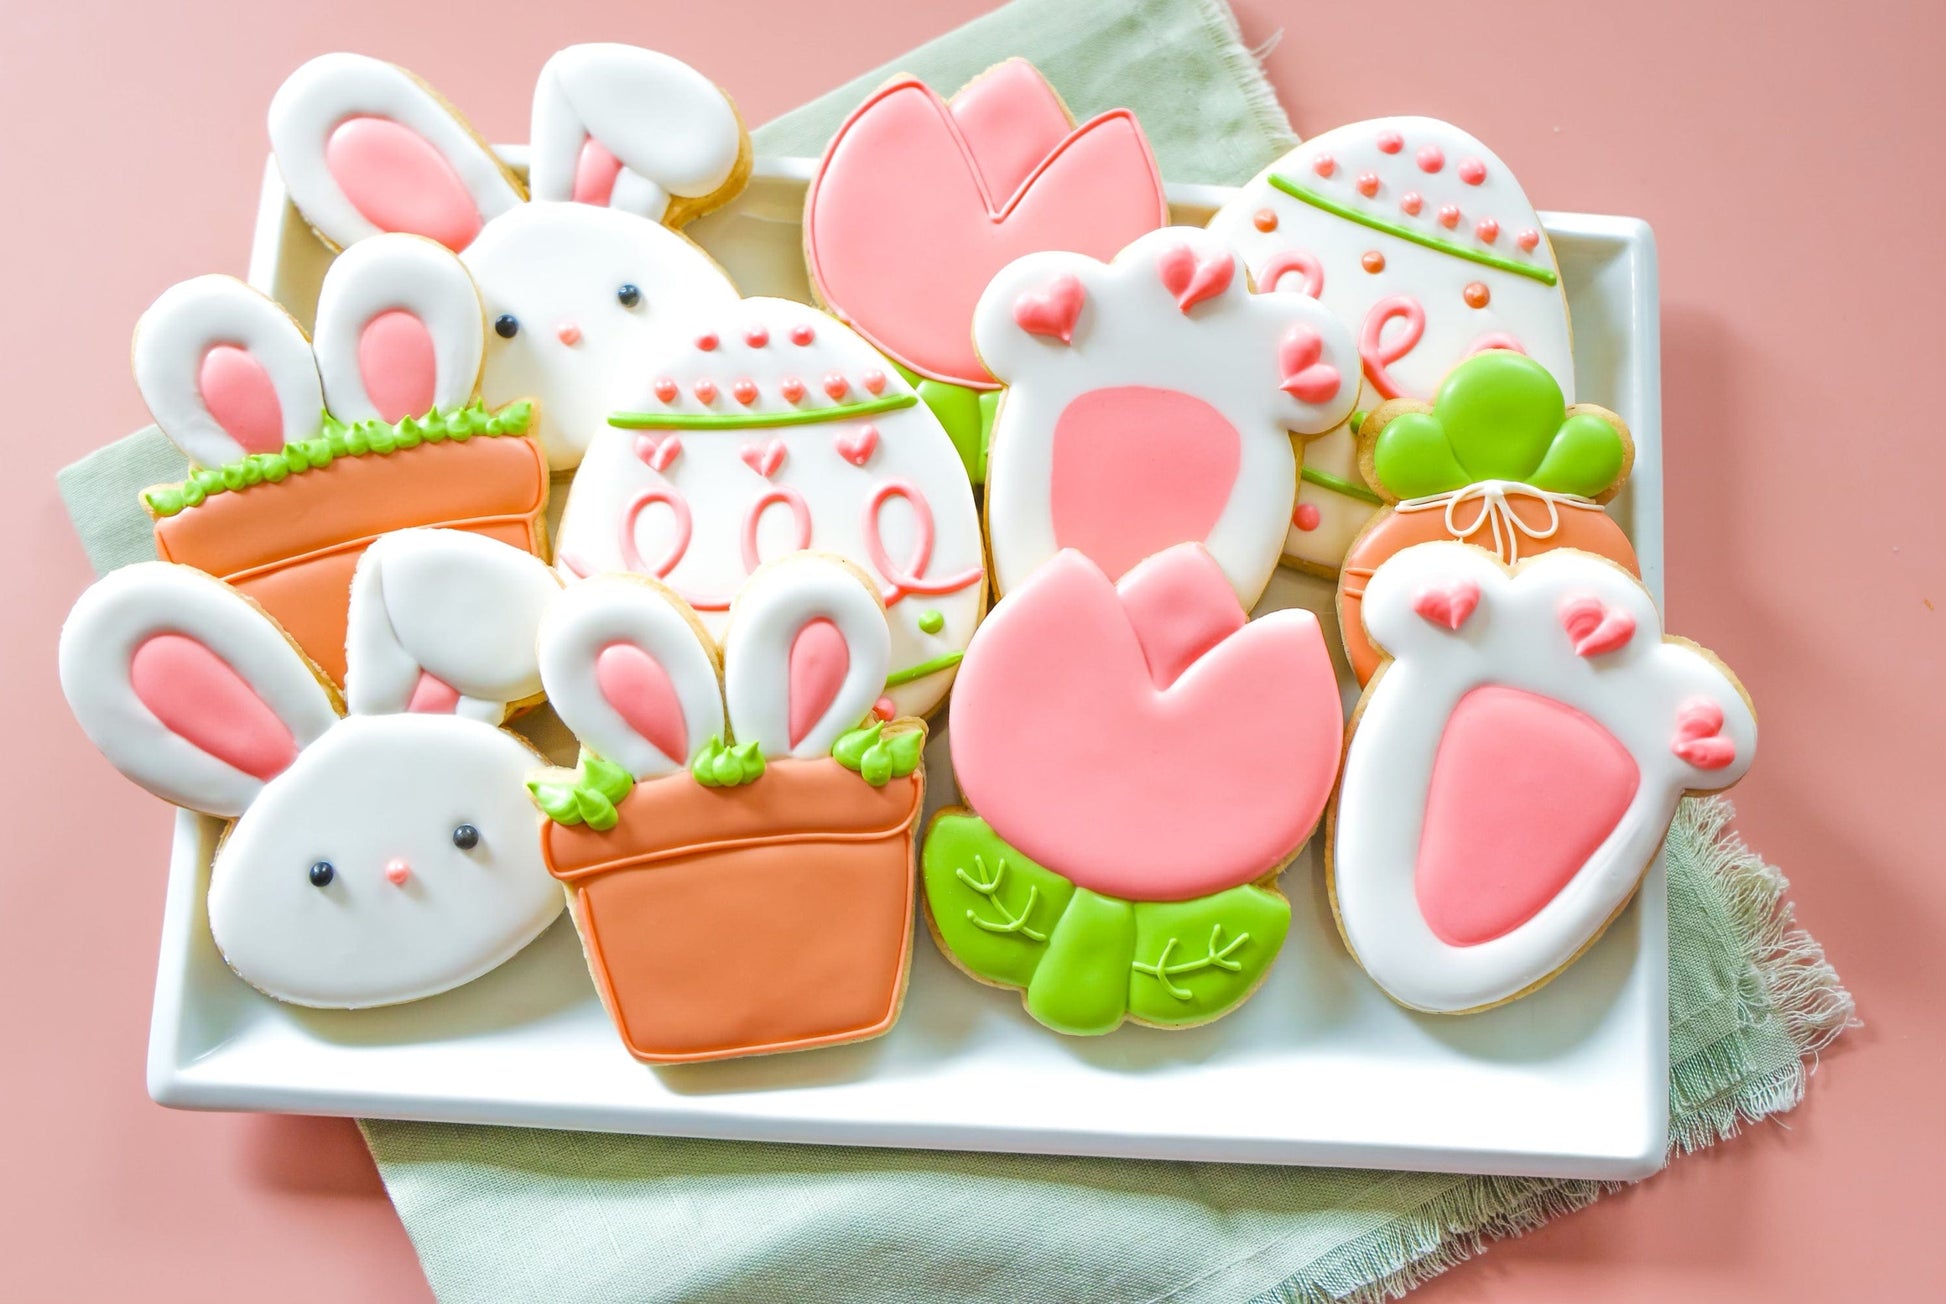 Easter Cookie Class